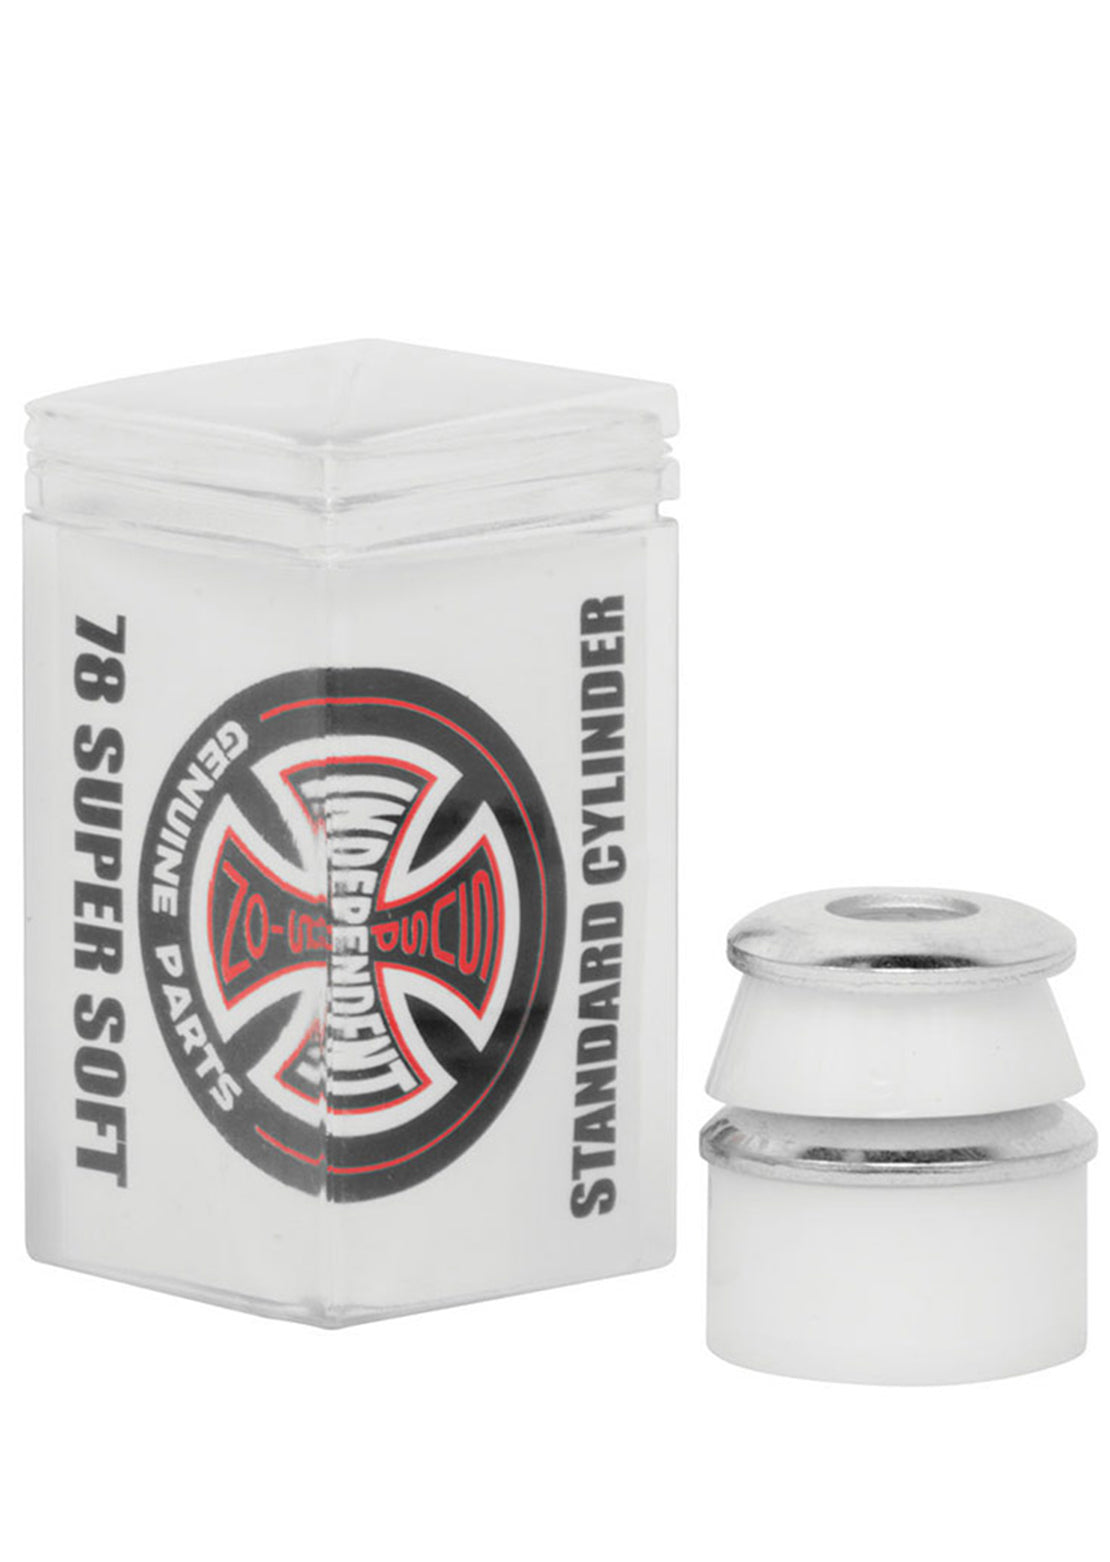 Independent Standard Bushings White - Conical - Super Soft - 78a